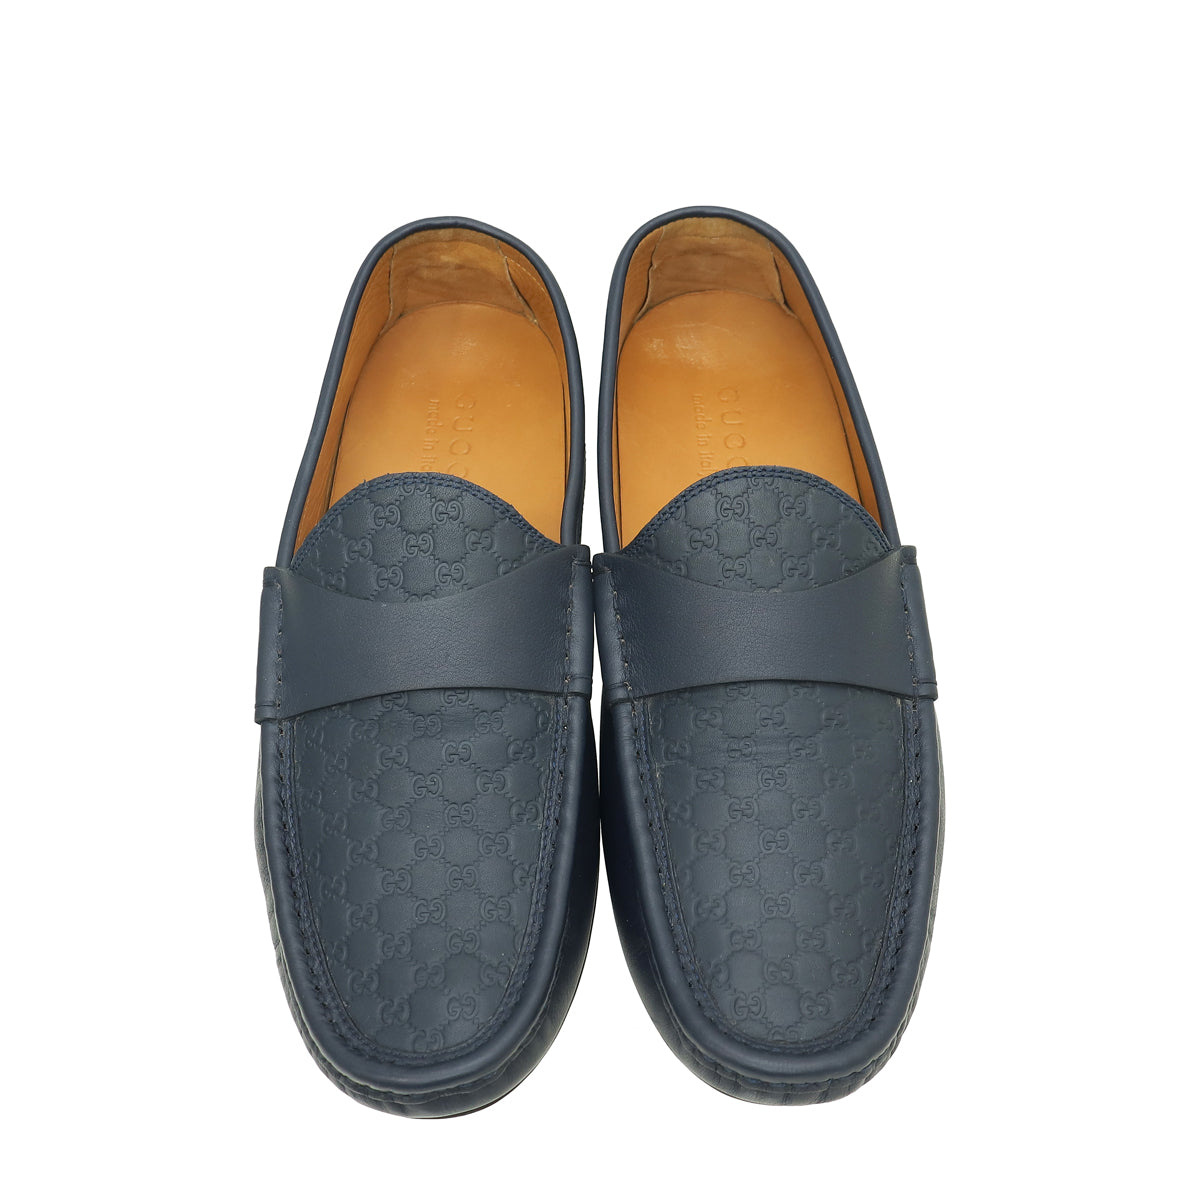 Gucci Navy Blue GG Microguccissima Men's Driver Loafers 7.5